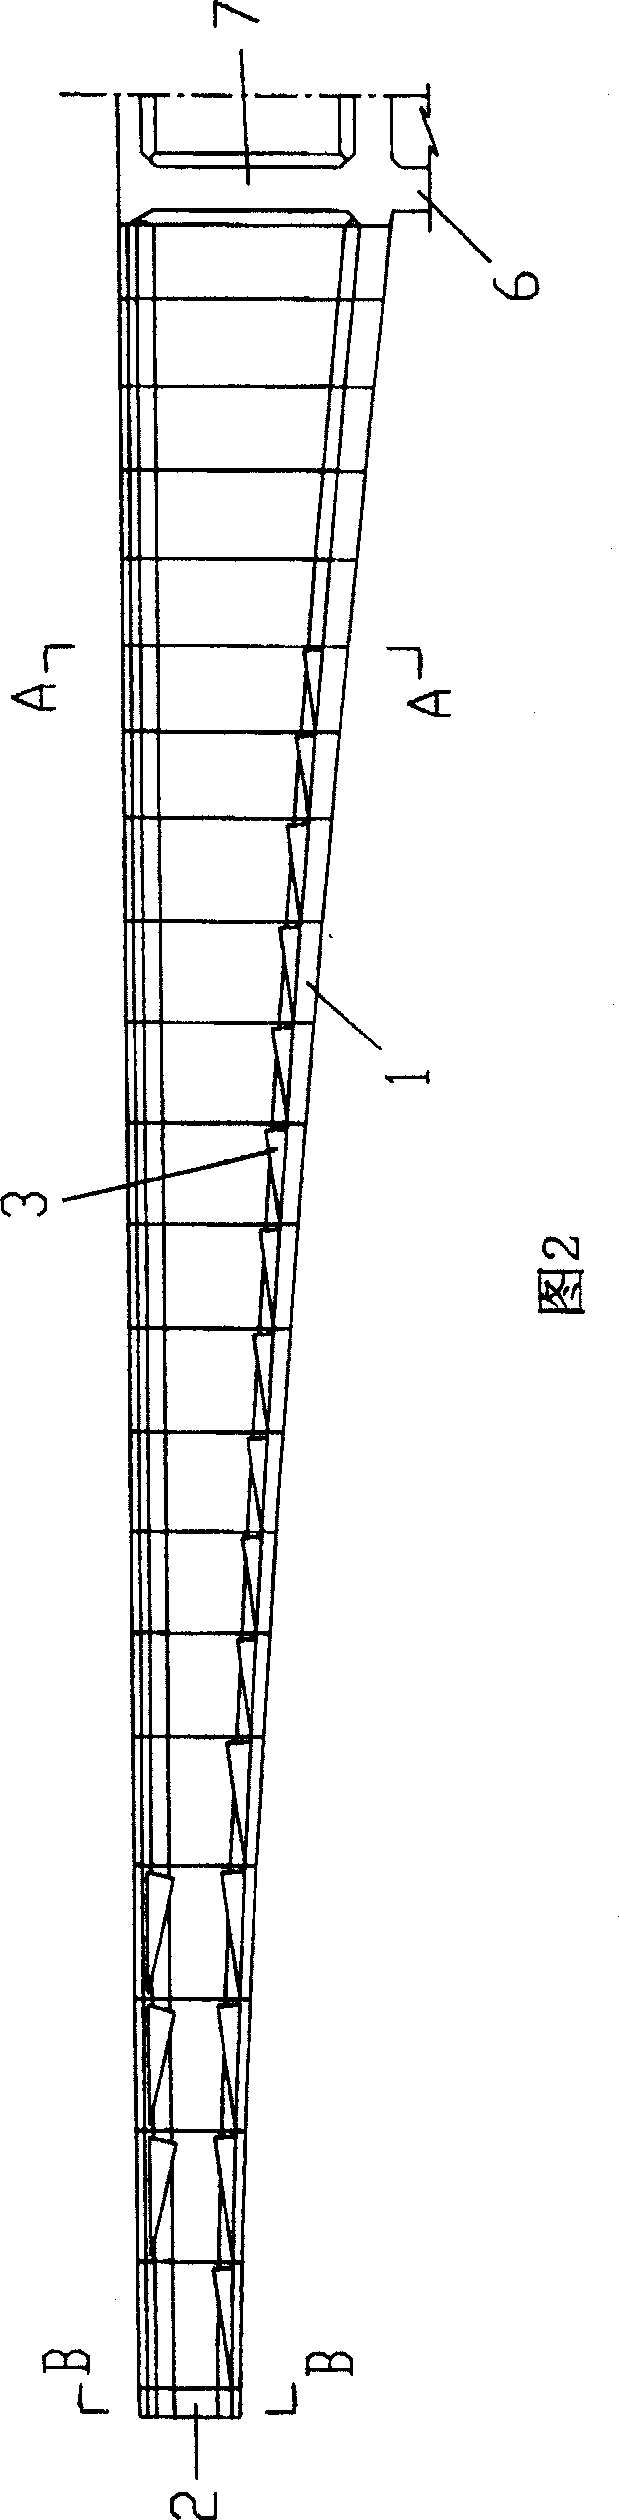 A baseboard cable horizontal arrangement prestress concrete variable cross-section box girder bridge and a construction method thereof